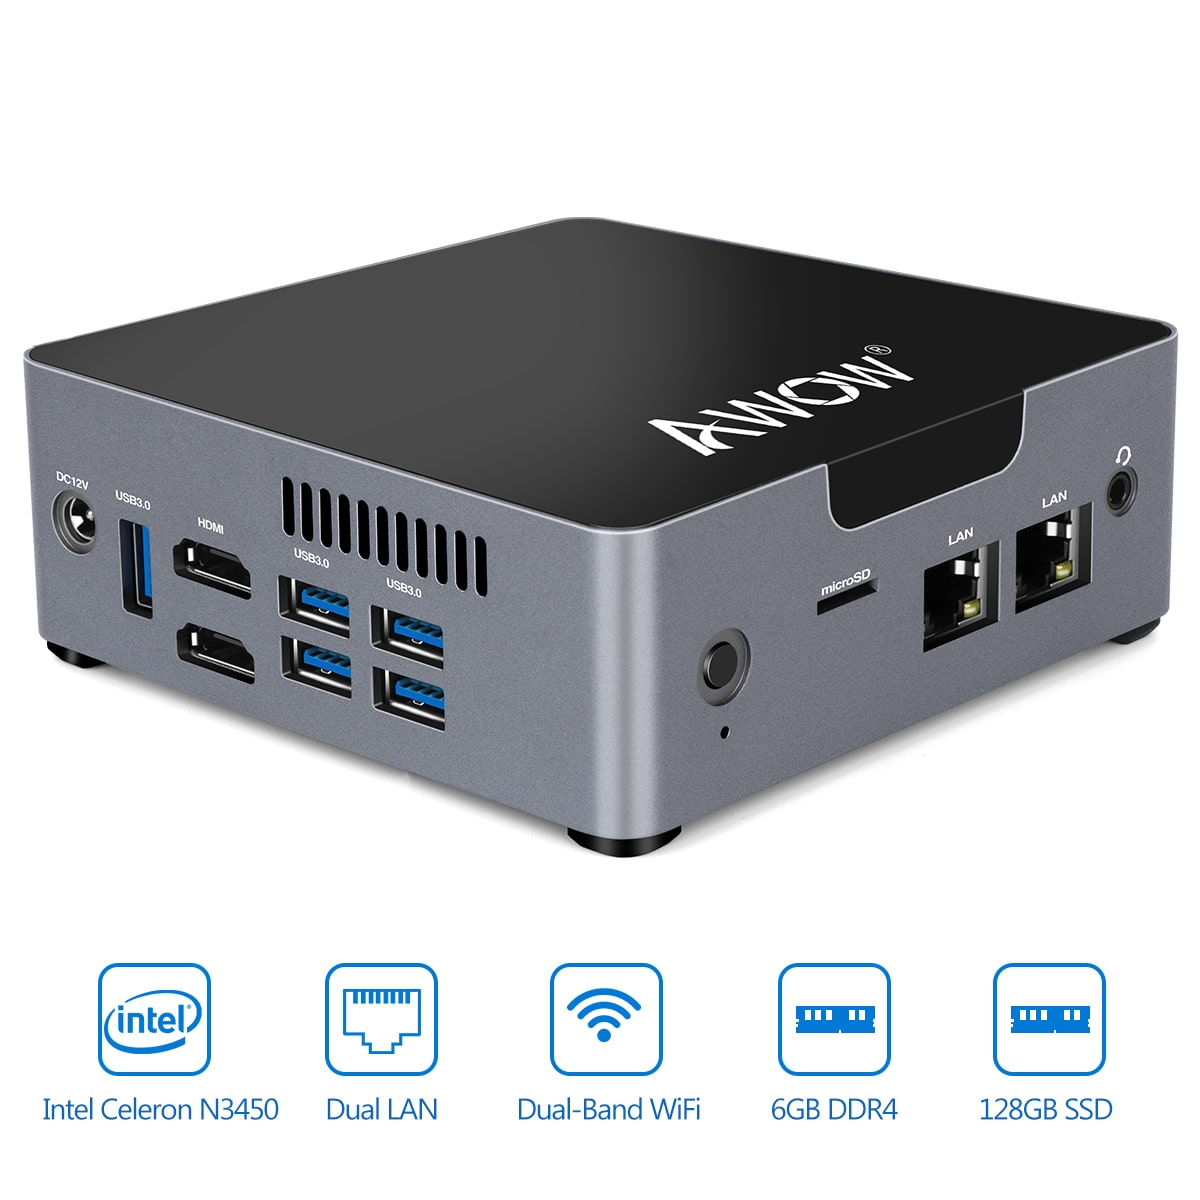 Newest 6Th Gen Core I3 Gaming Pc Mini Computer With Support 2.4G/5G DUAL BAND Wifi